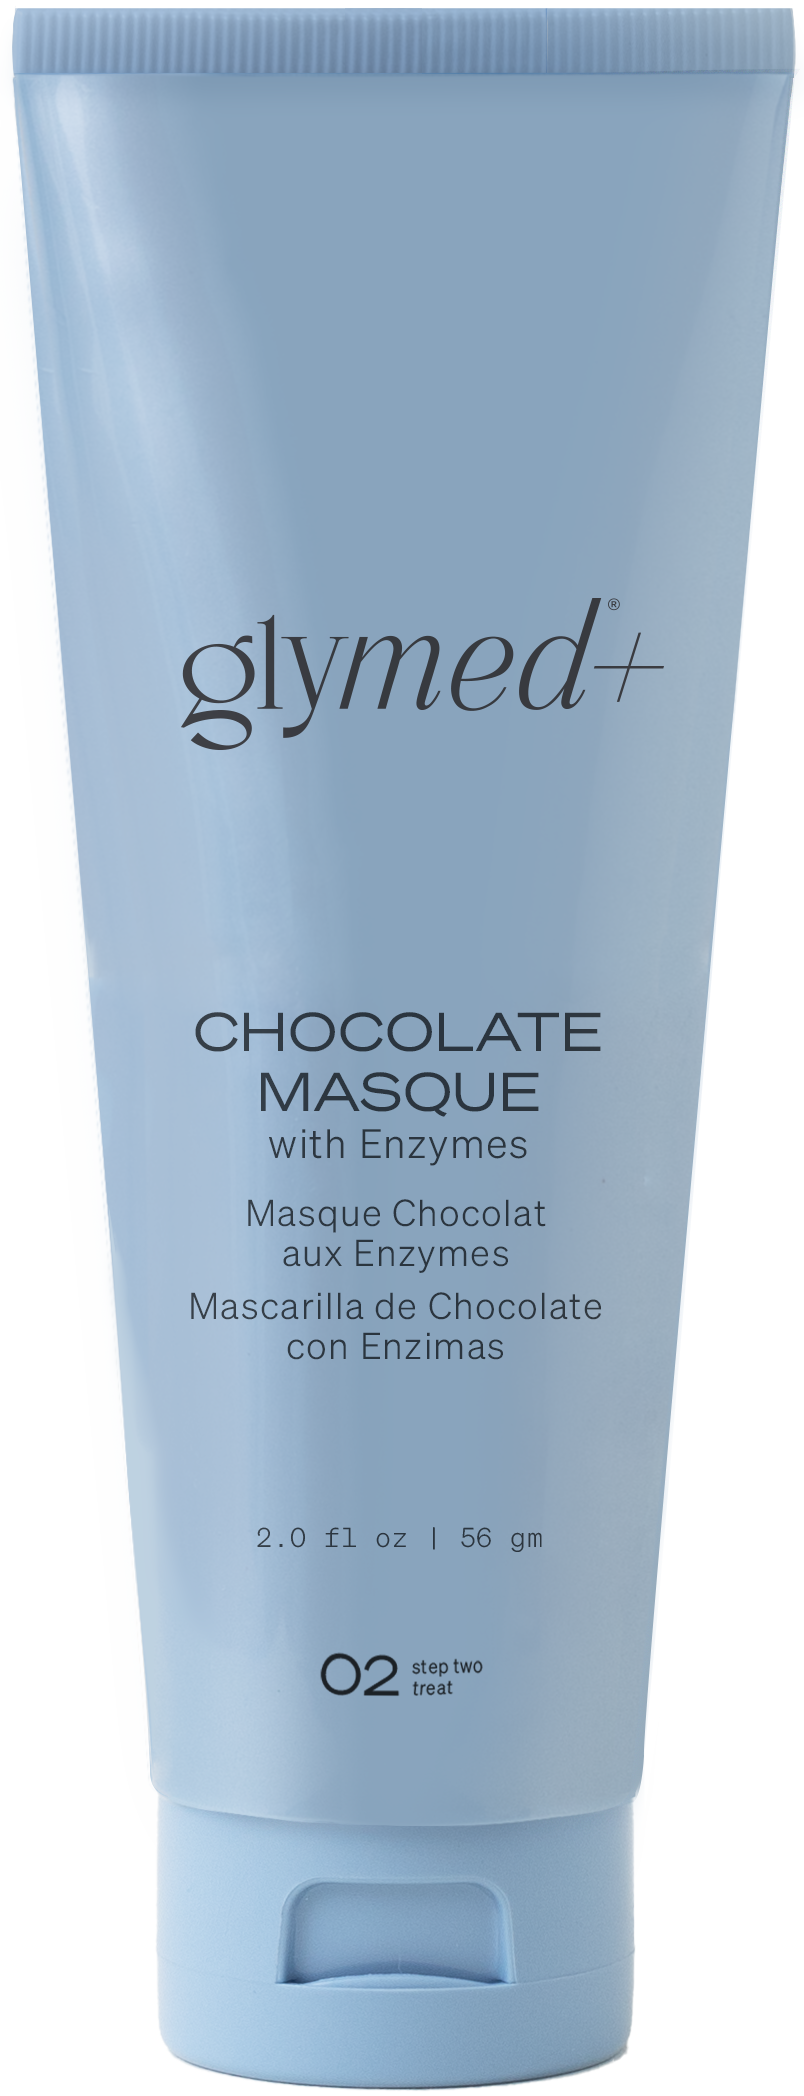 Chocolate Masque with Enzyme